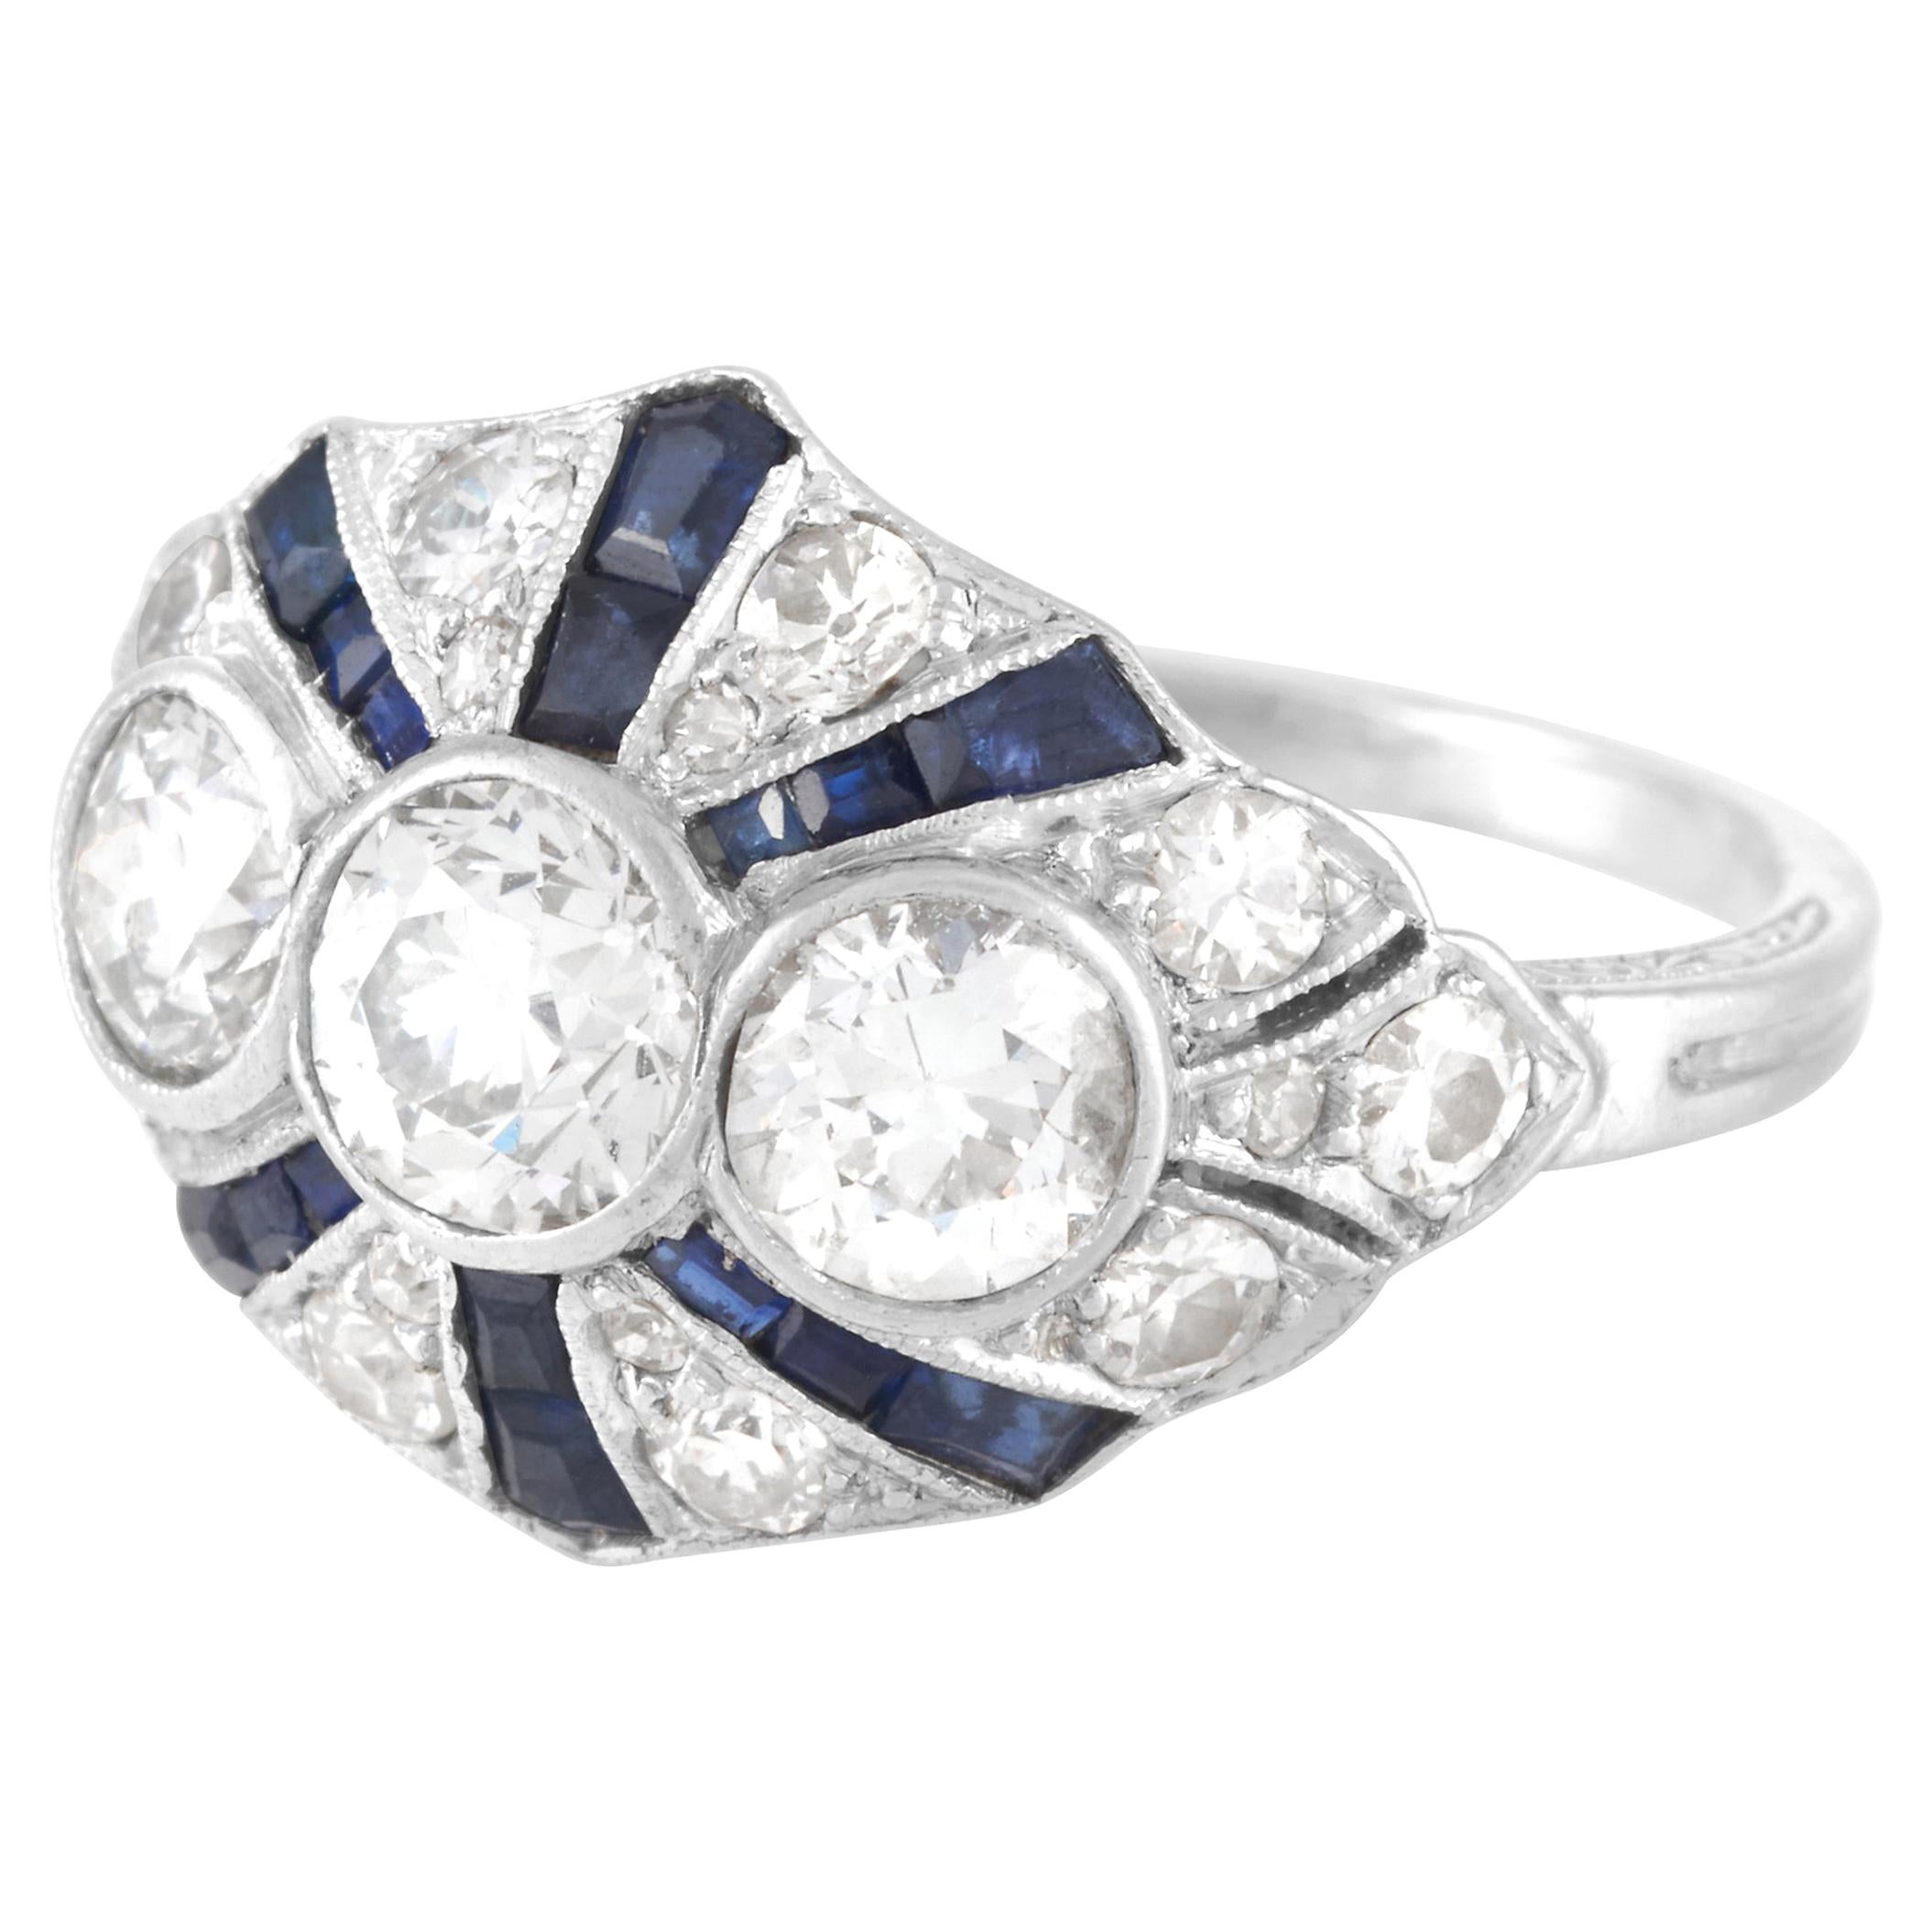 Art Deco Old European Cut Diamond and Synthetic Sapphire Ring in Platinum